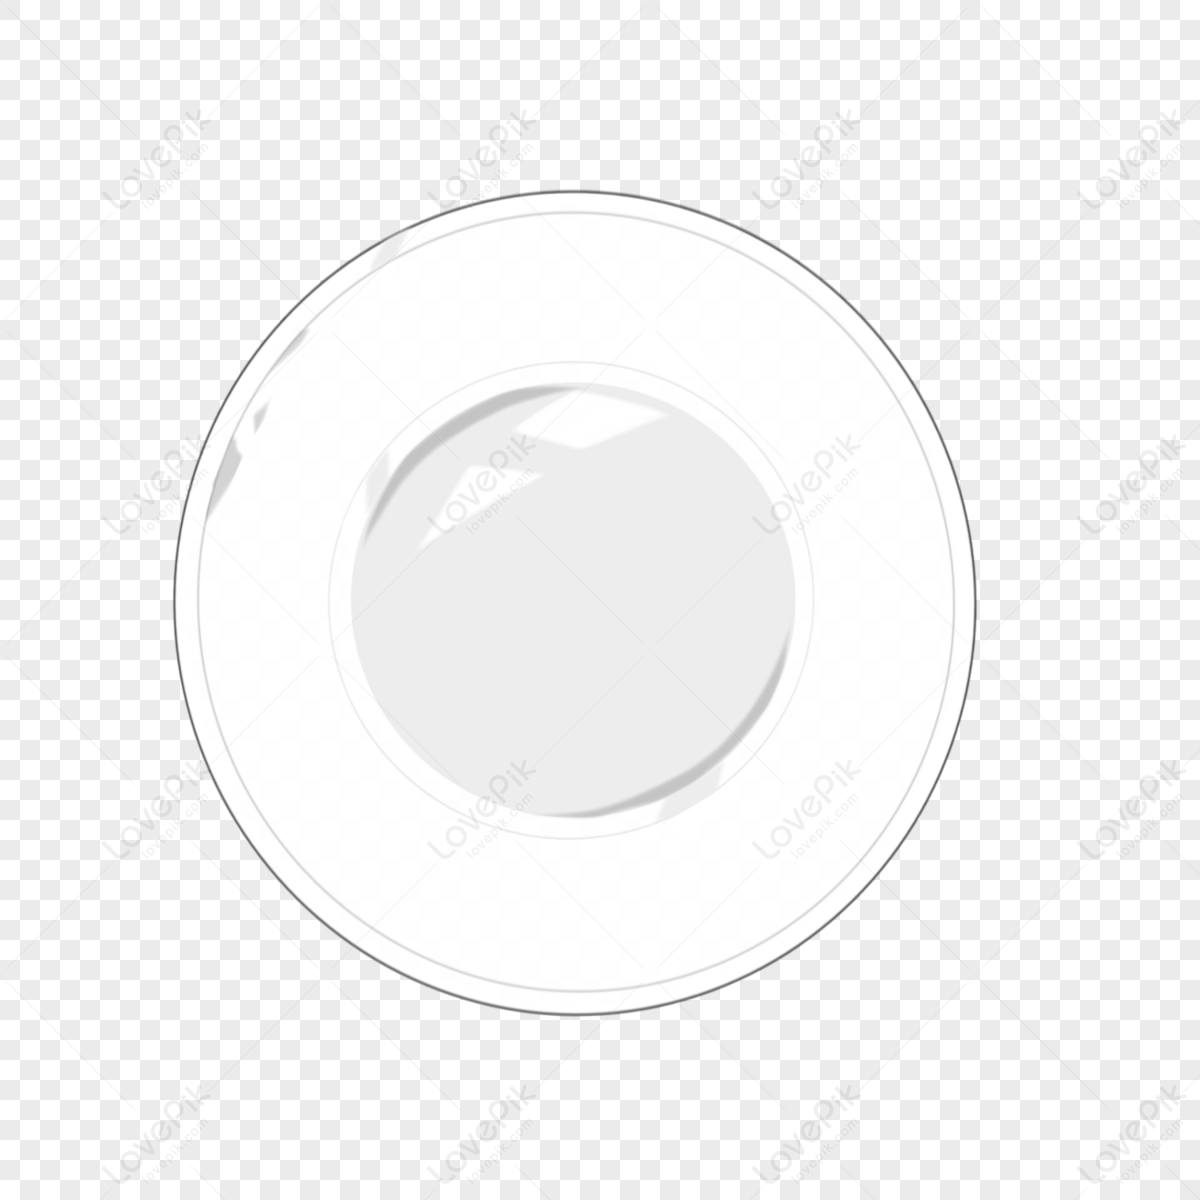 Butter stick on round plate white background Vector Image